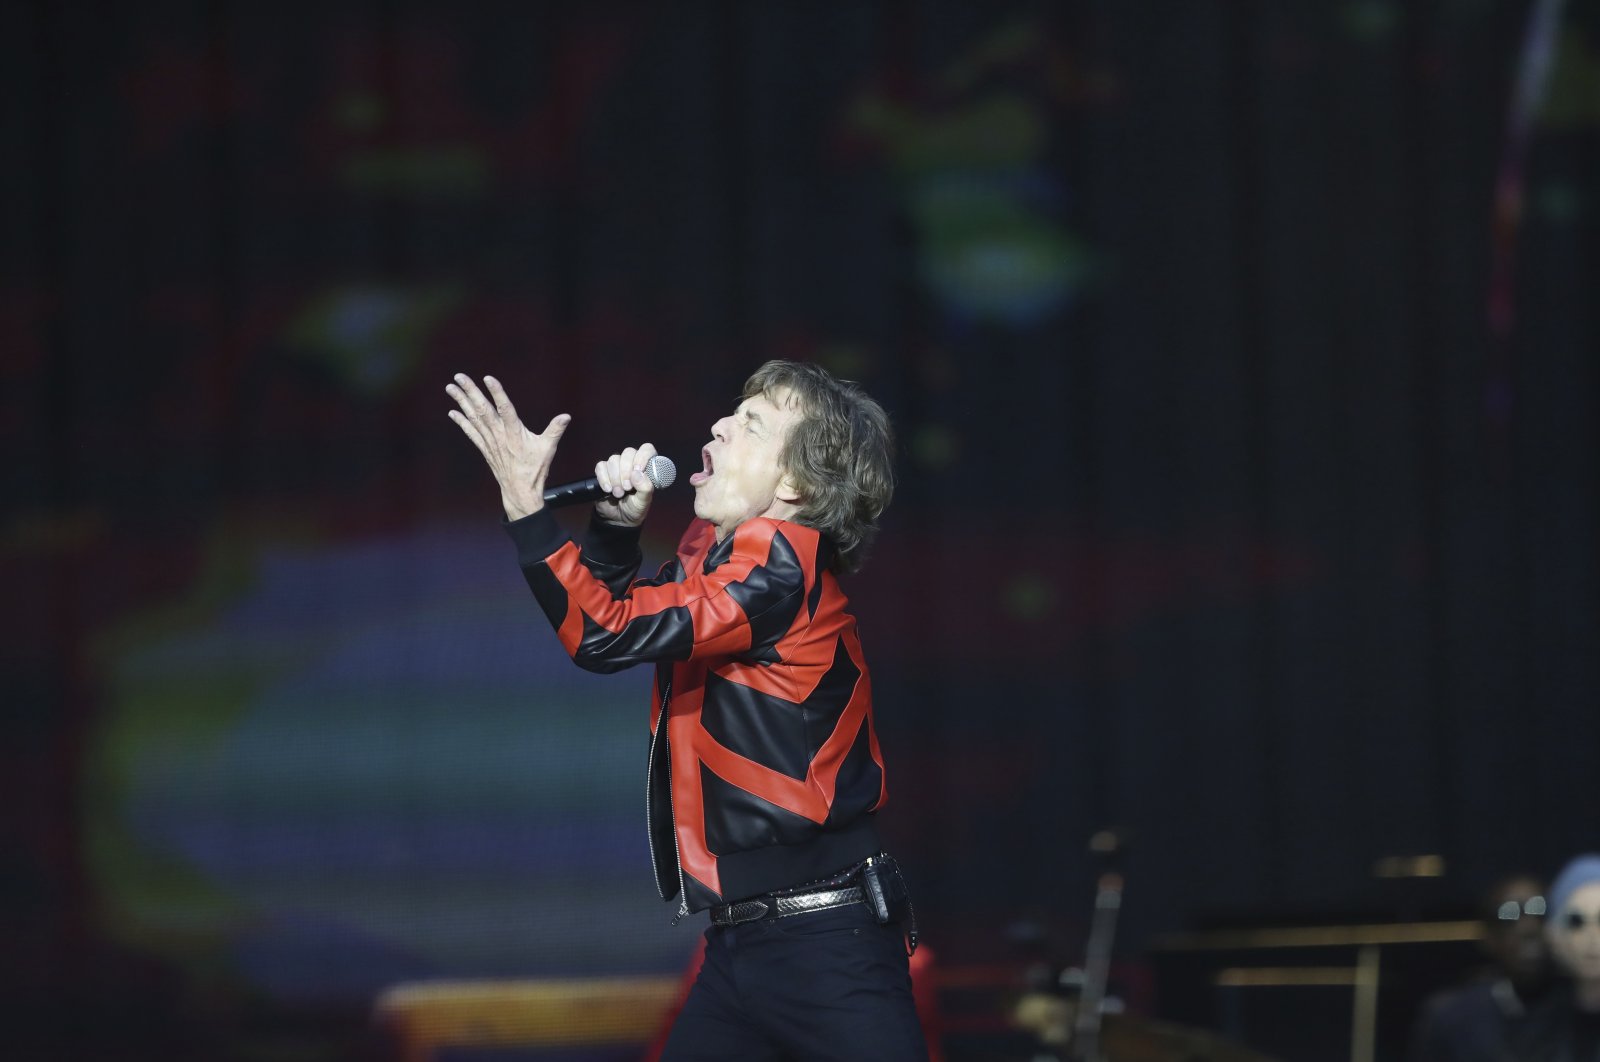 Mick Jagger of the Rolling Stones gestures as they play on stage at the Anfield stadium in Liverpool, England, during a concert as part of their &quot;Sixty&quot; European tour, June 9, 2022. (AP Photo)